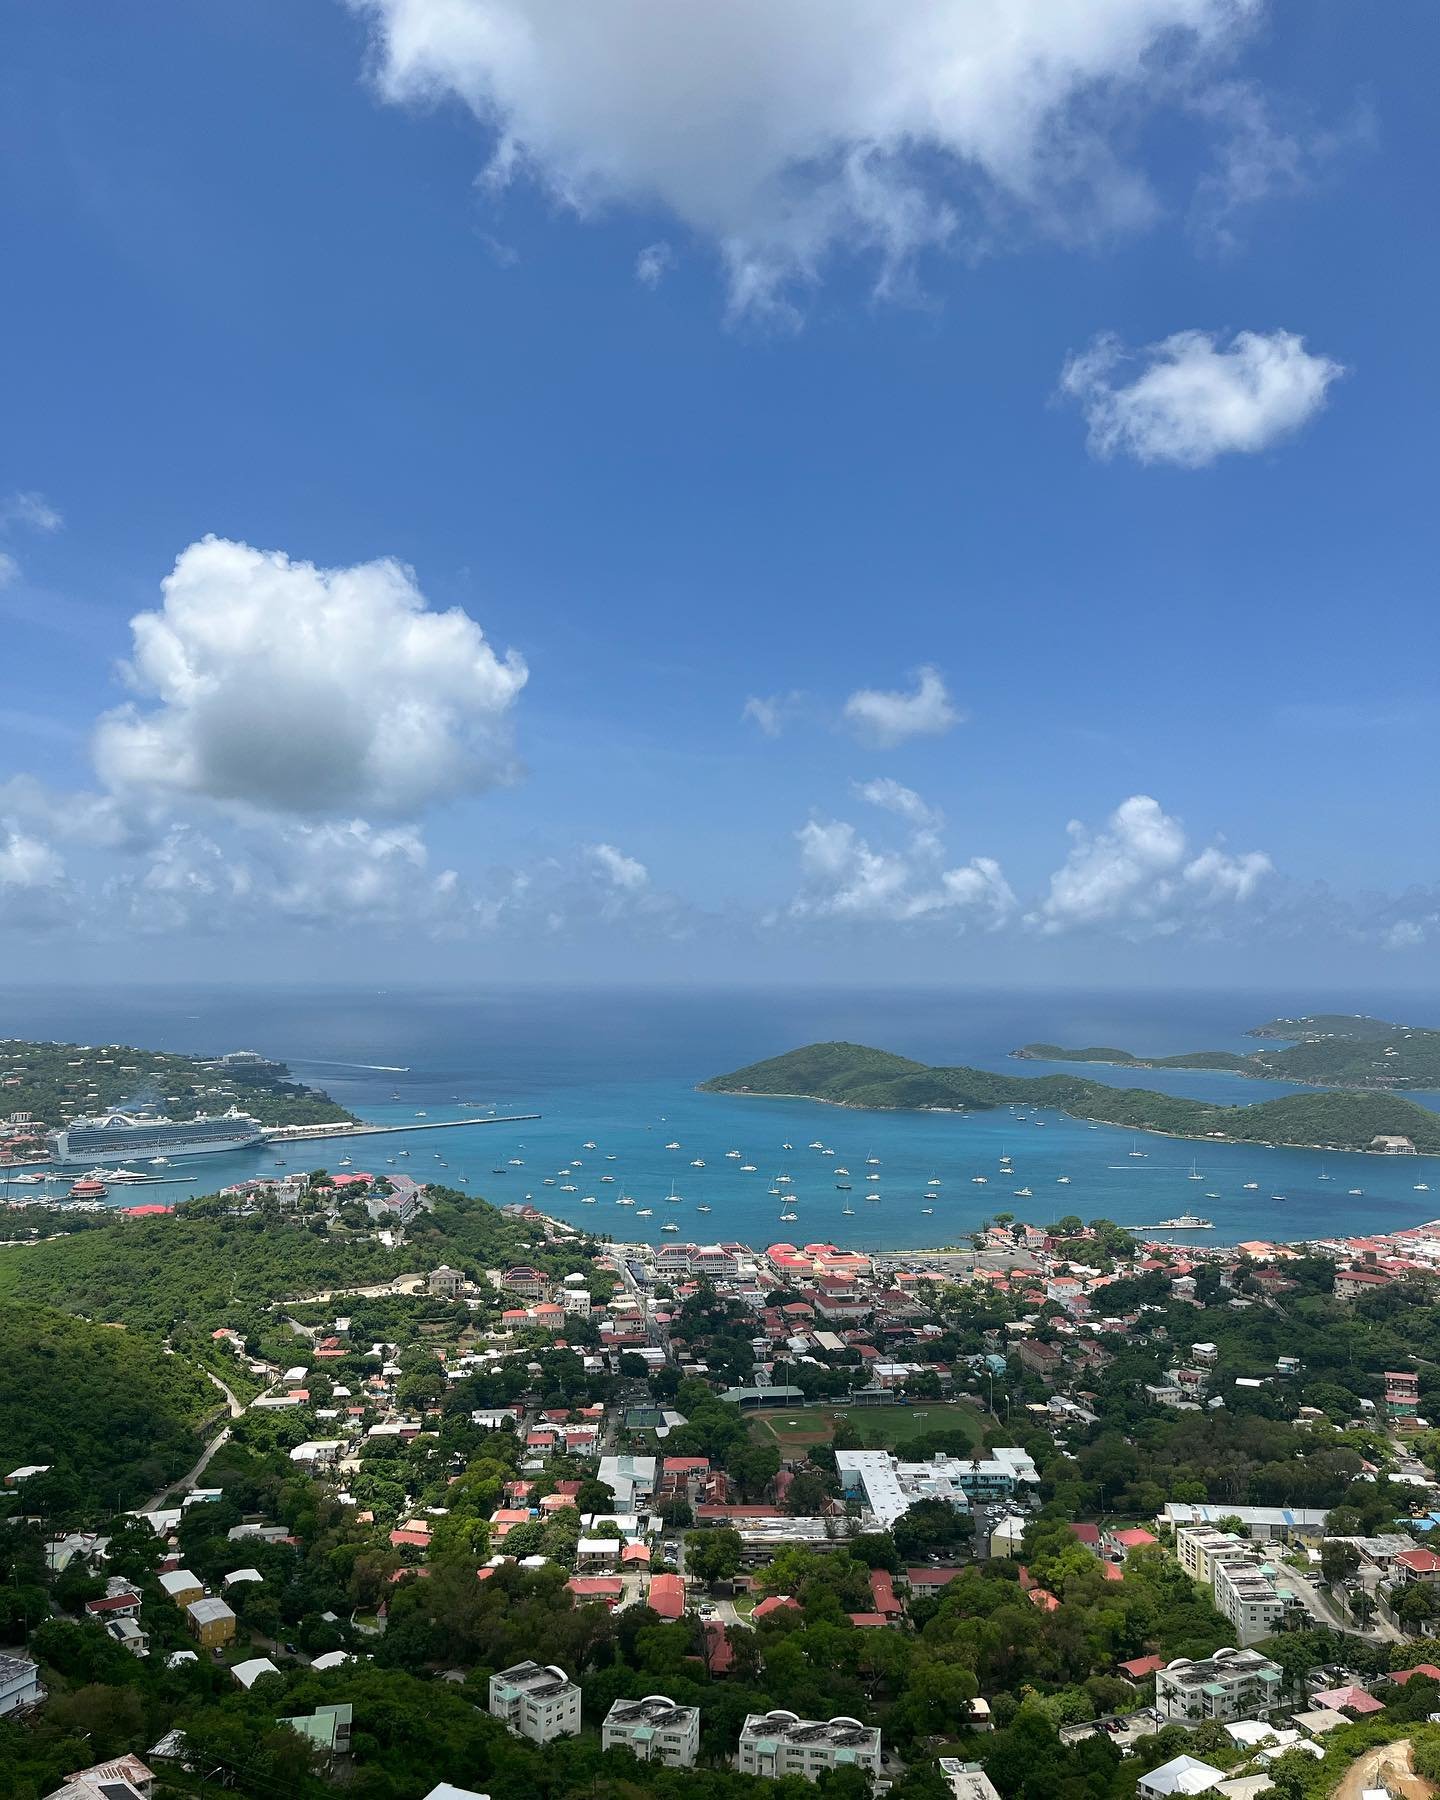 There are no shortages of gorgeous views here in St. Thomas. Attendees, you are in for some serious beauty. Plus, exceptional culinary experiences, top-notch networking with the wedding industry elite, vibrant parties, and meaningful education. 

St.